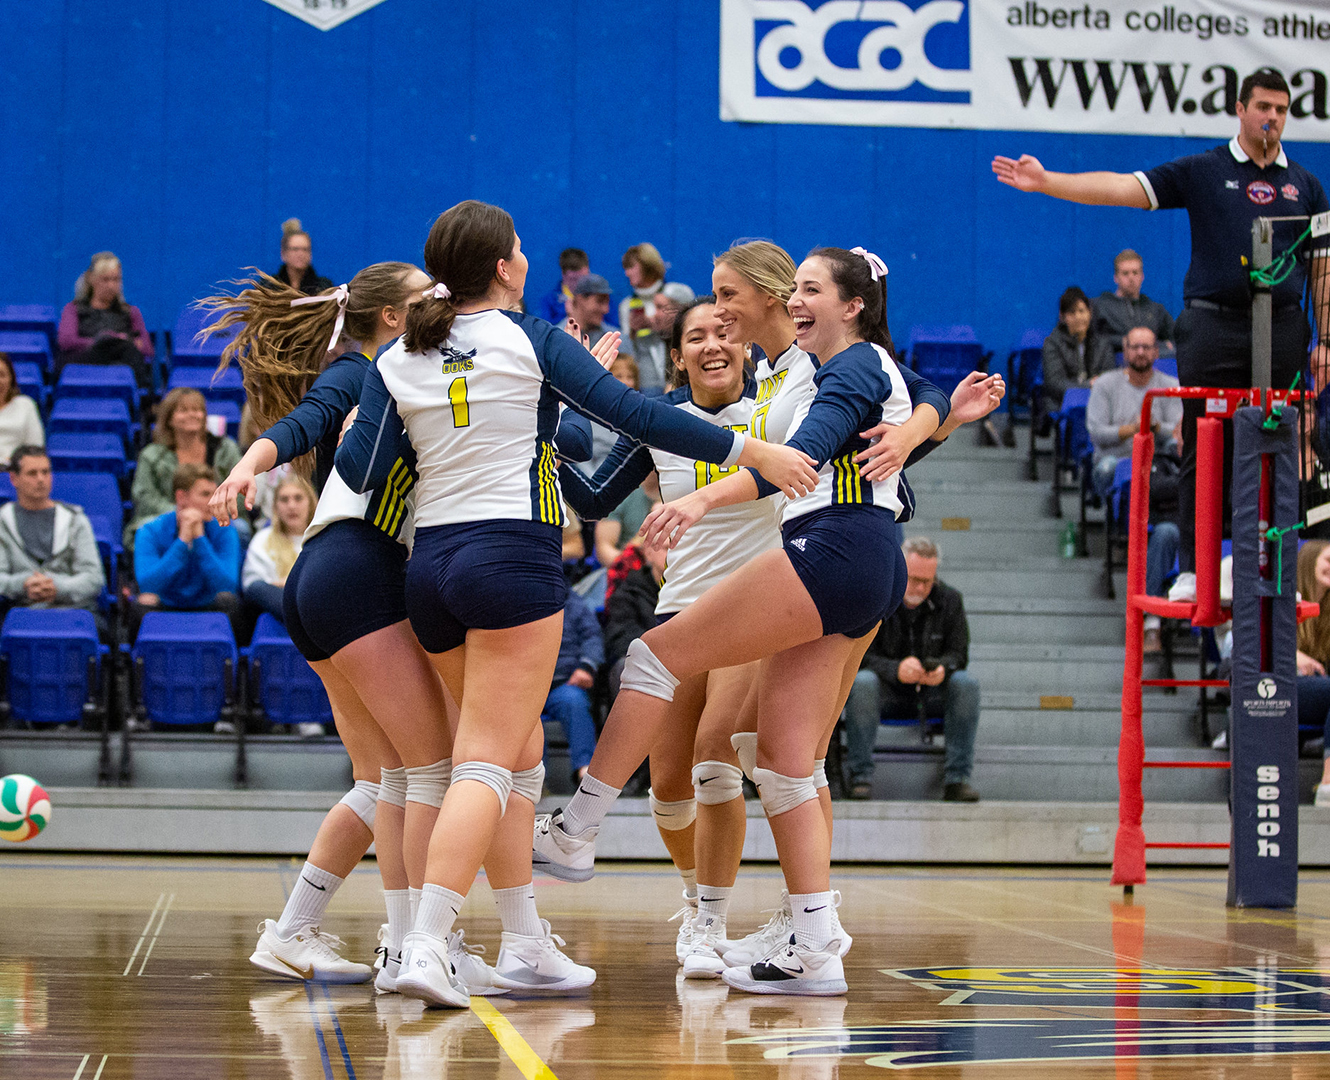 NAIT Ooks women's volley ball team in a circle celebrating